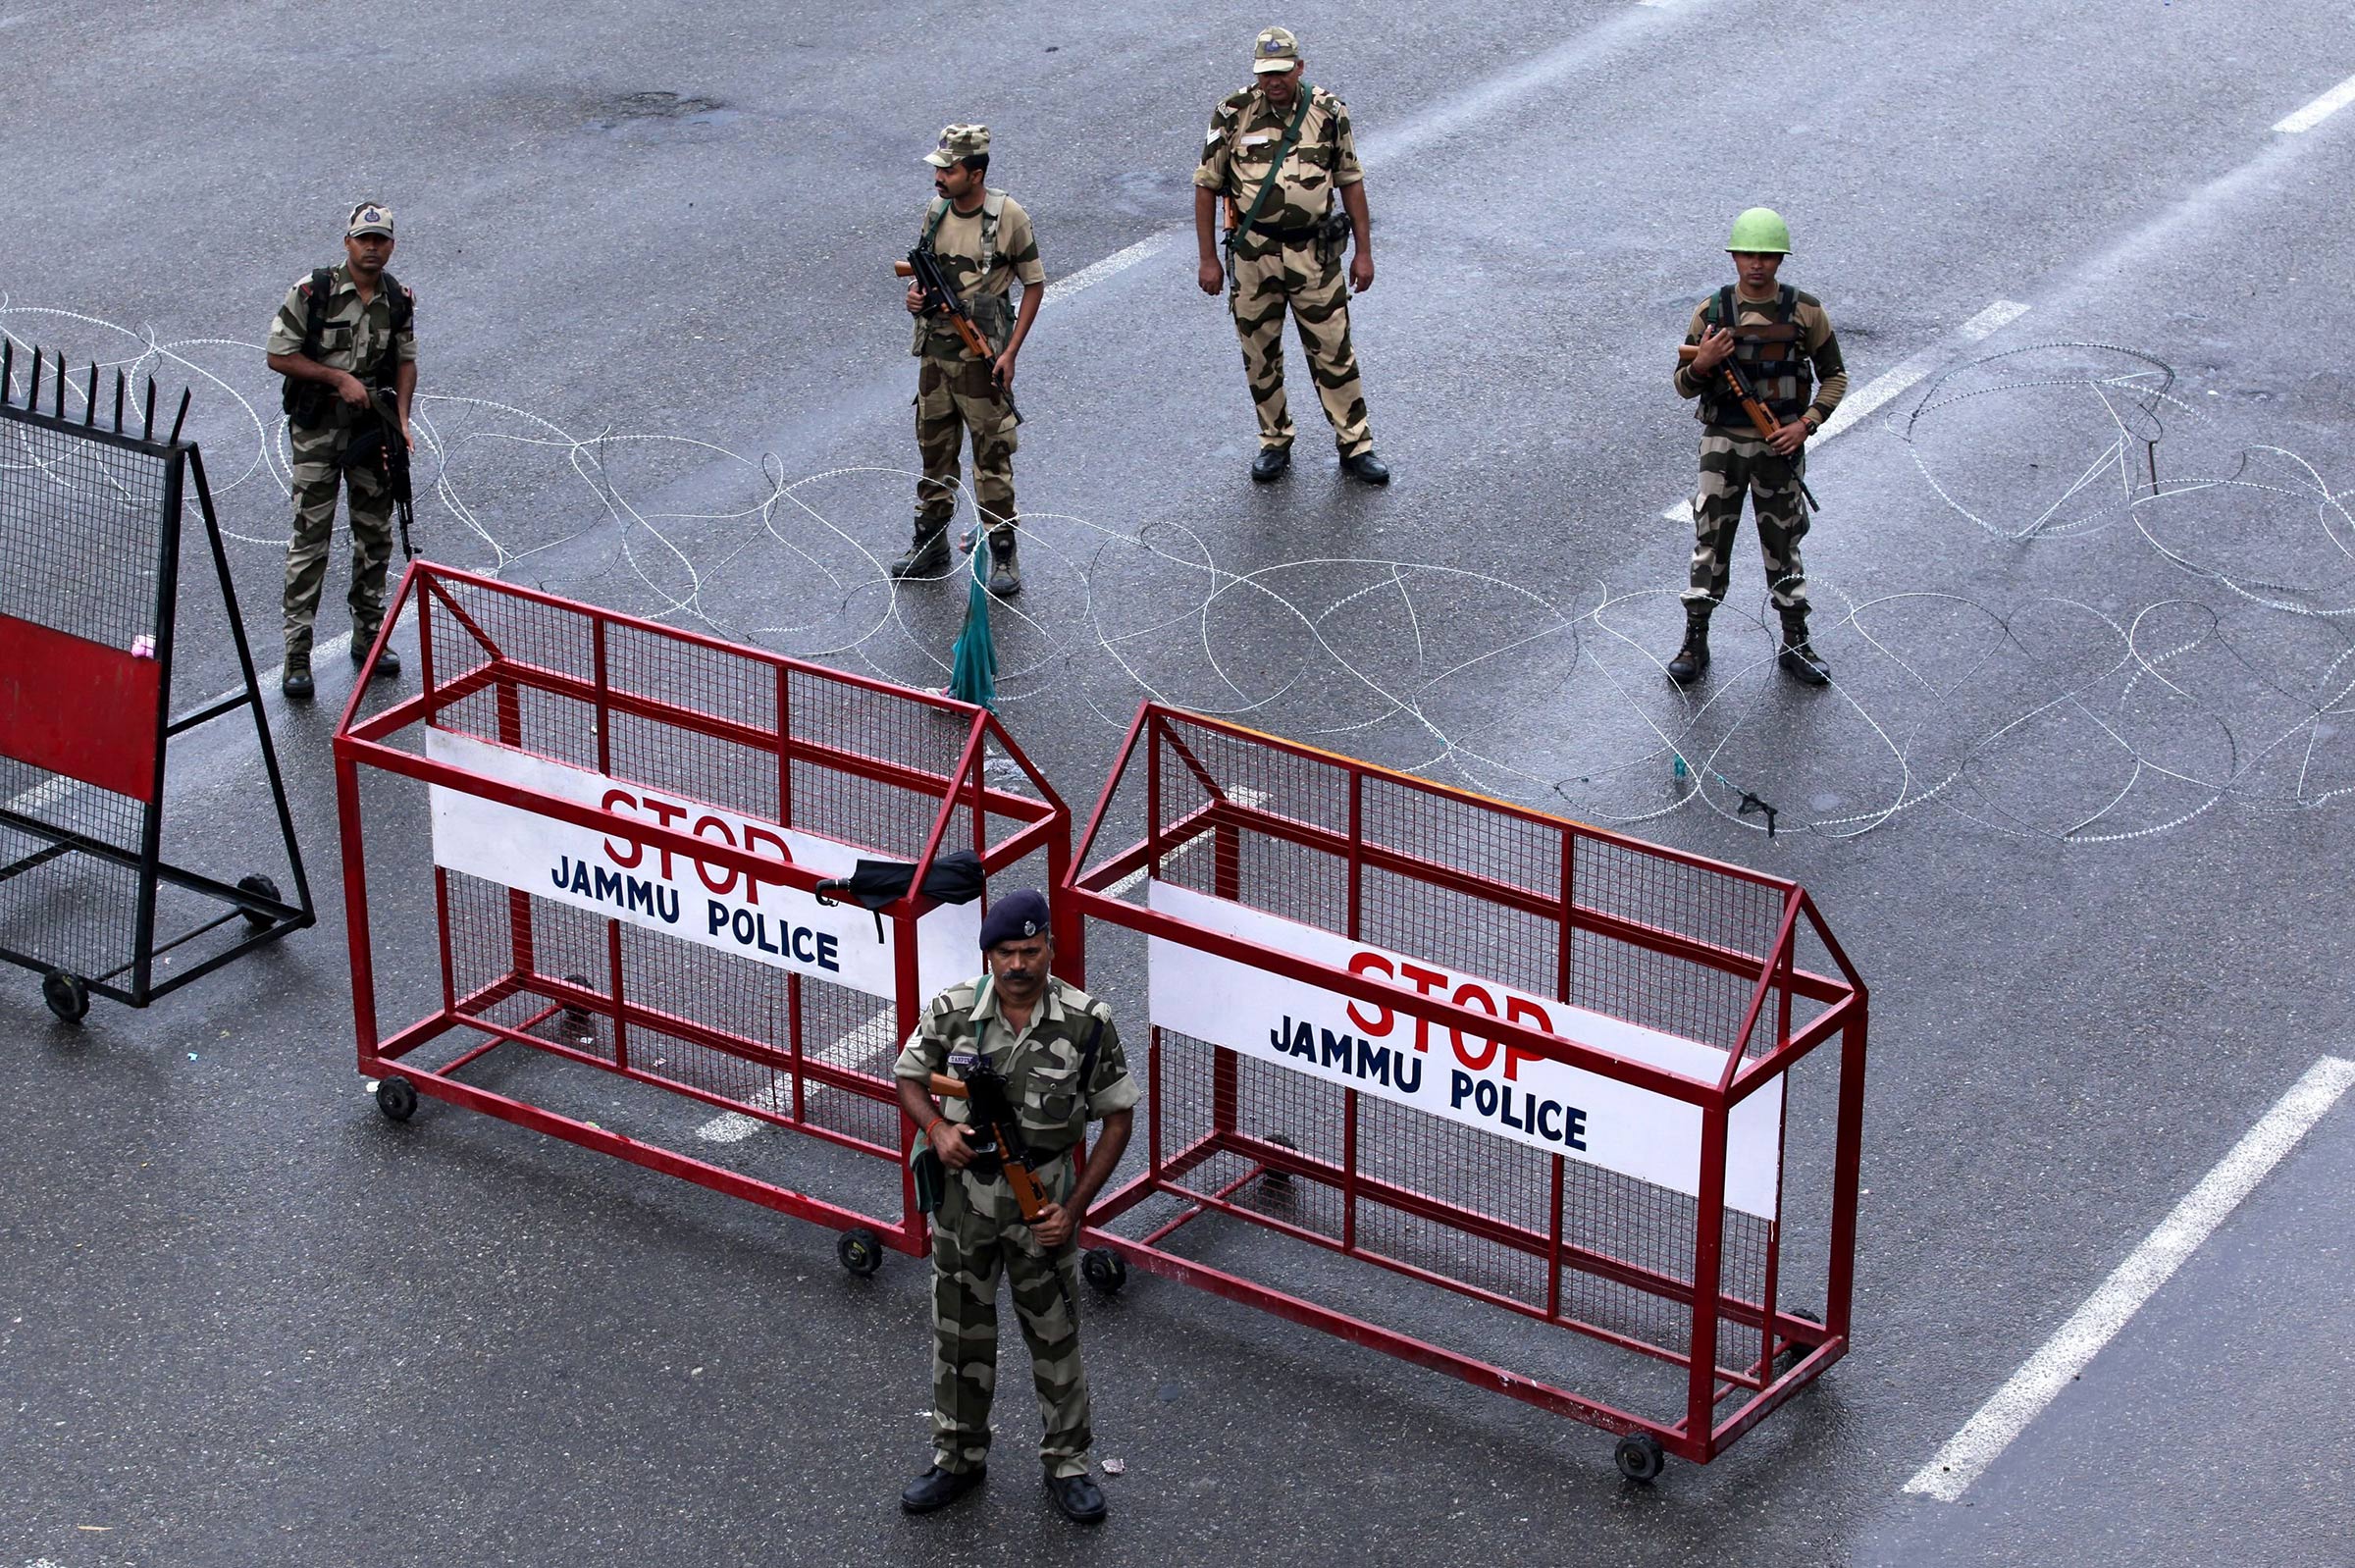 Security personnel stand guard at a roadblock in Jammu on August 7, 2019. - A protester died after being chased by police during a curfew in Kashmir's main city, left in turmoil by an Indian government move to tighten control over the restive region, a police official said on August 7.